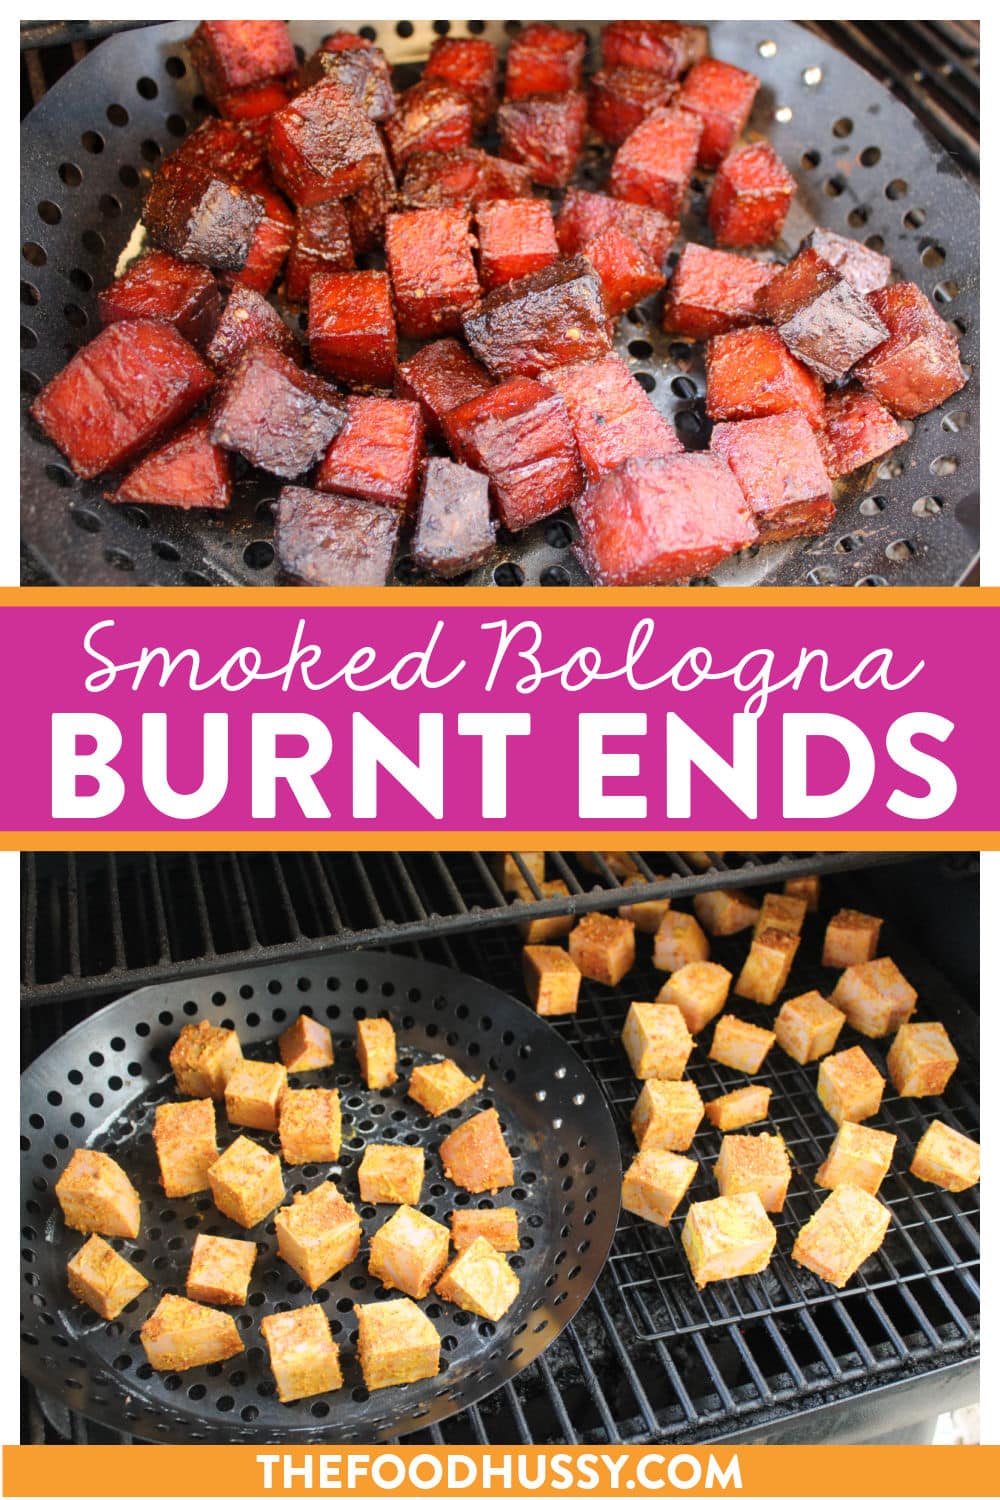 Traeger Smoked Bologna Burnt Ends are a fun and easy appetizer for any BBQ or summer party! Toss them in mustard and seasoning and then pop them on the smoker. Great to make when you want to smoke multiple things at the same time! Take these off early and snack away! via @foodhussy